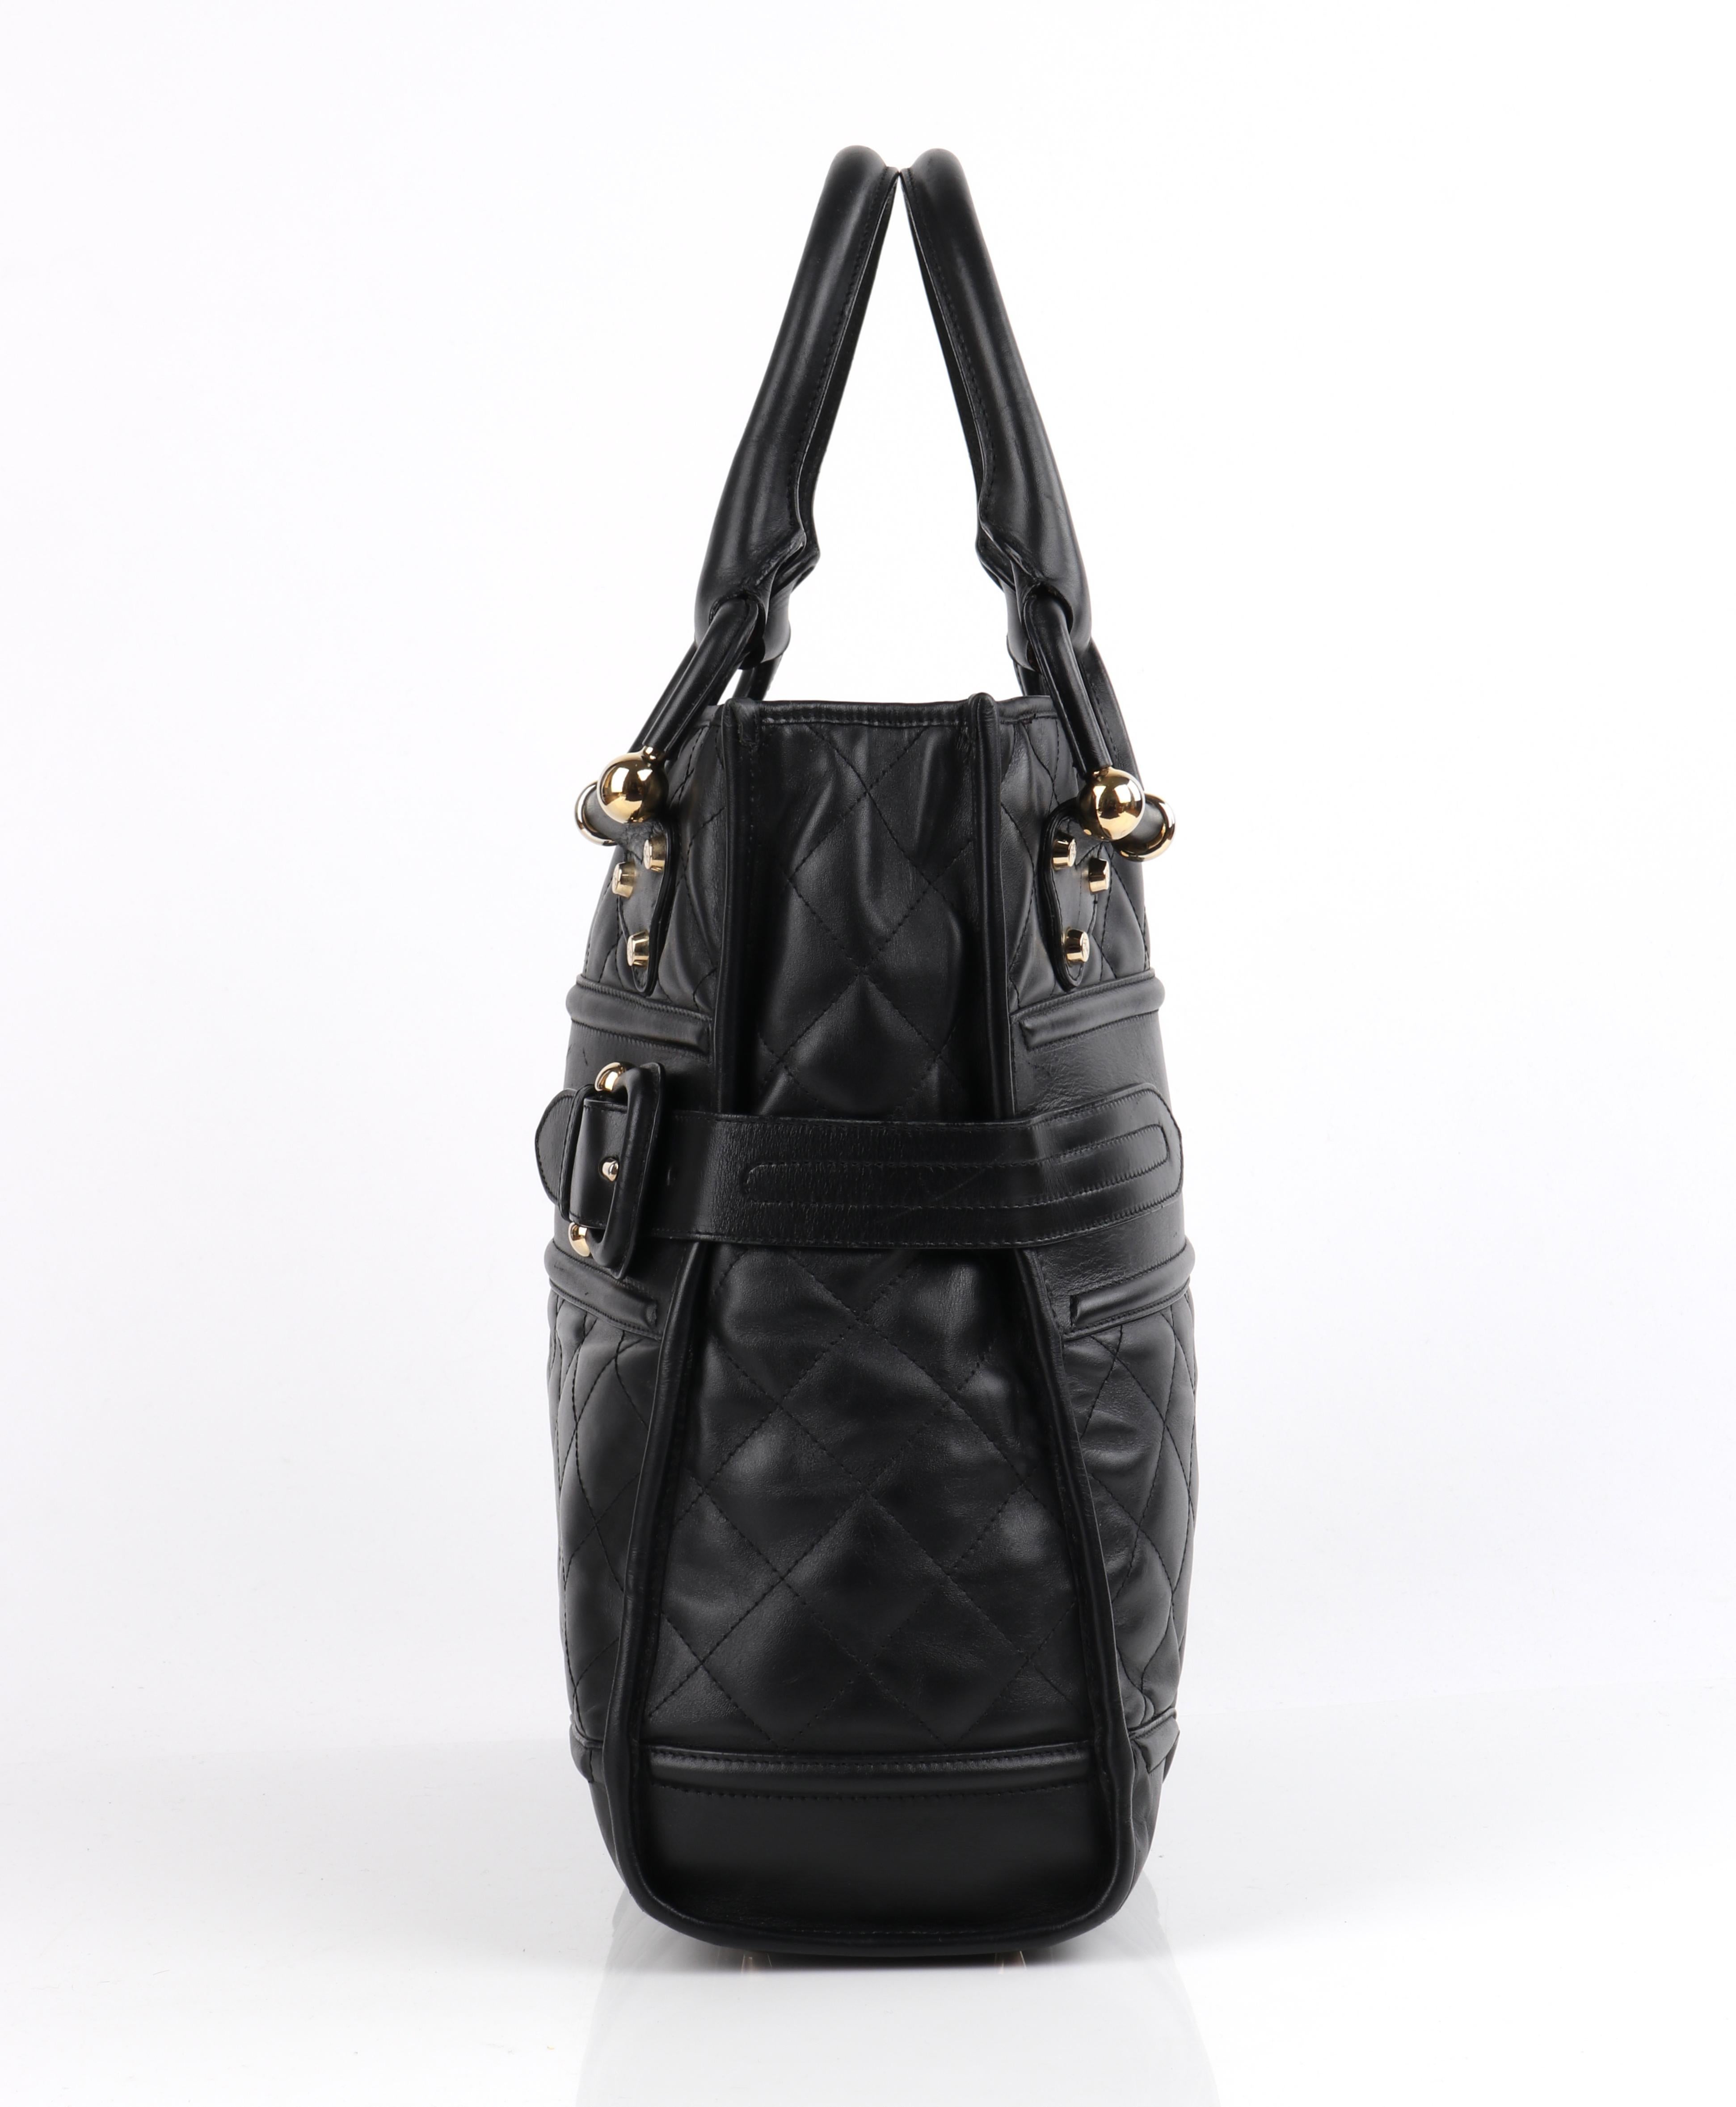 burberry quilted handbag